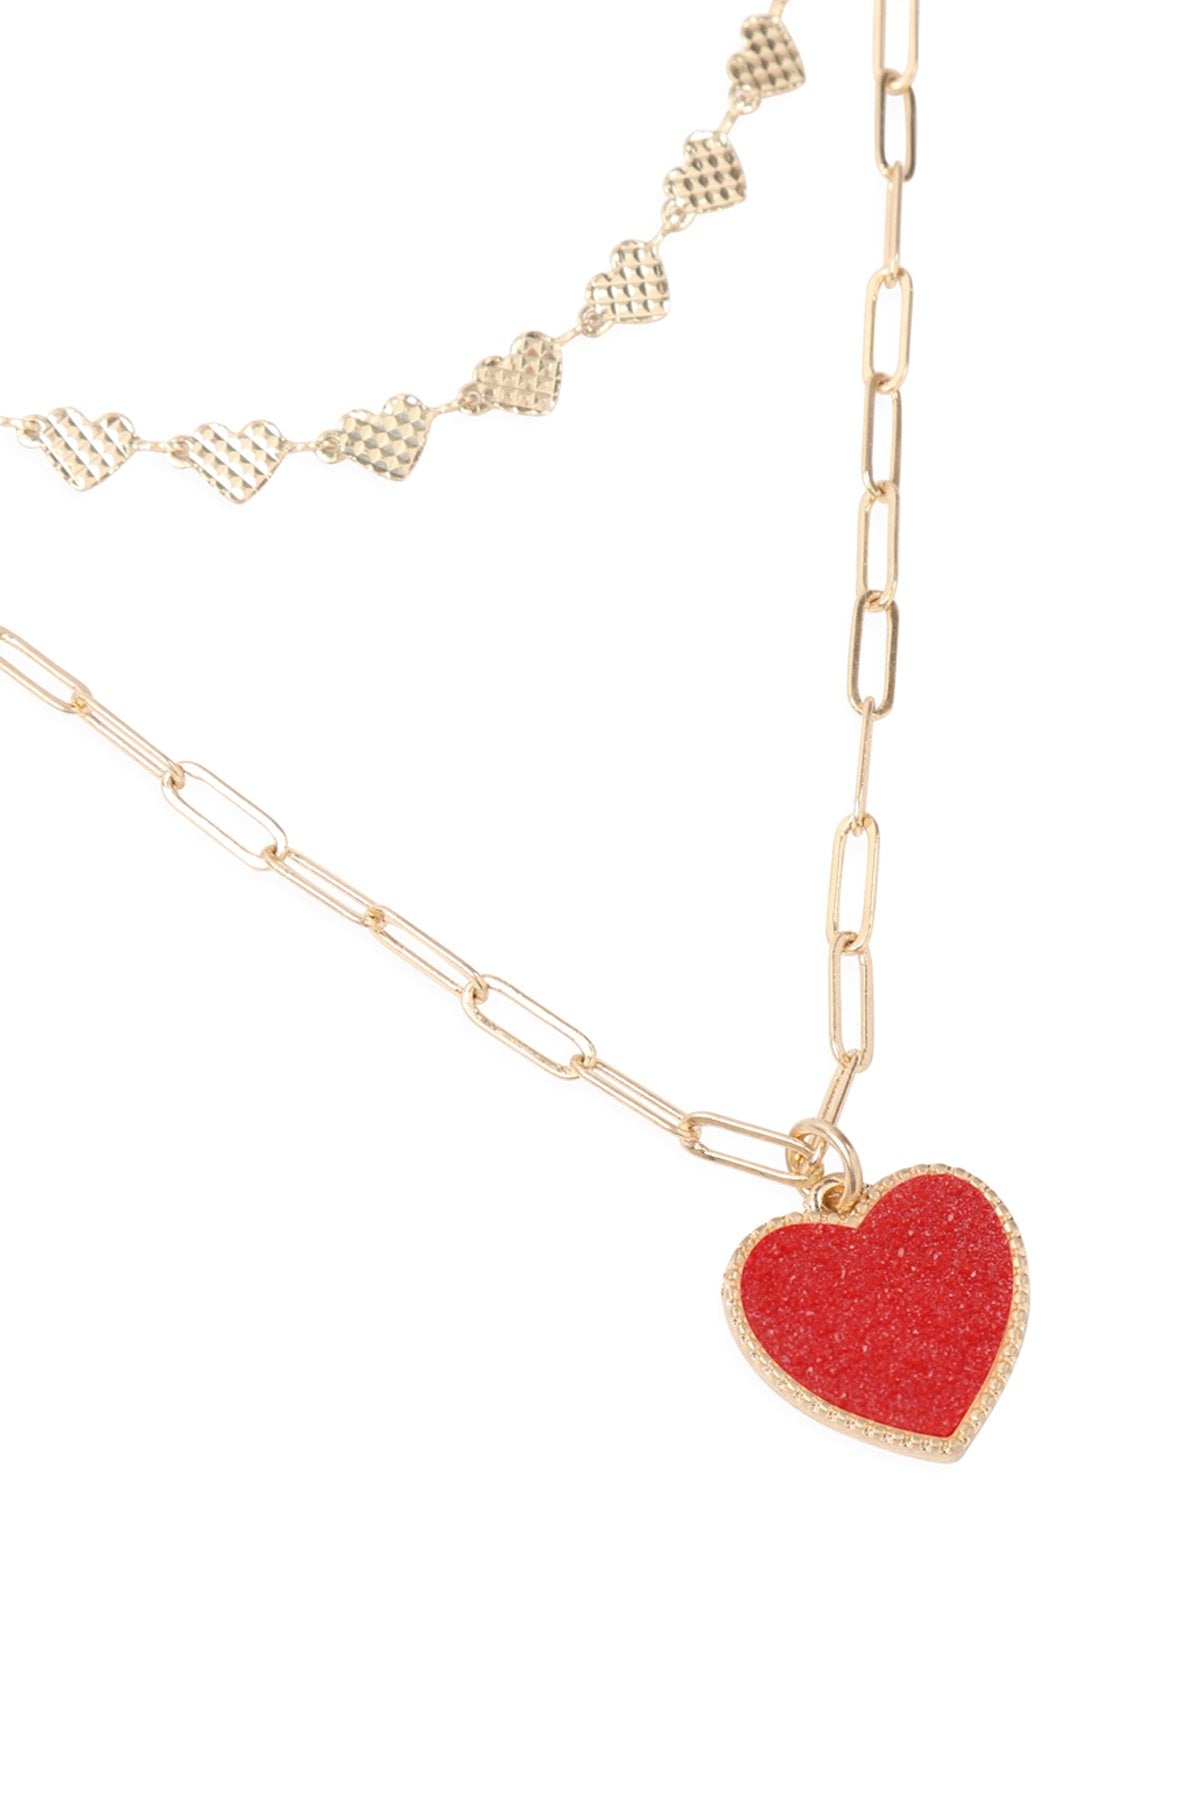 Jnb009 - Two Layered Druzy Heart Necklace - LOLA LUXE